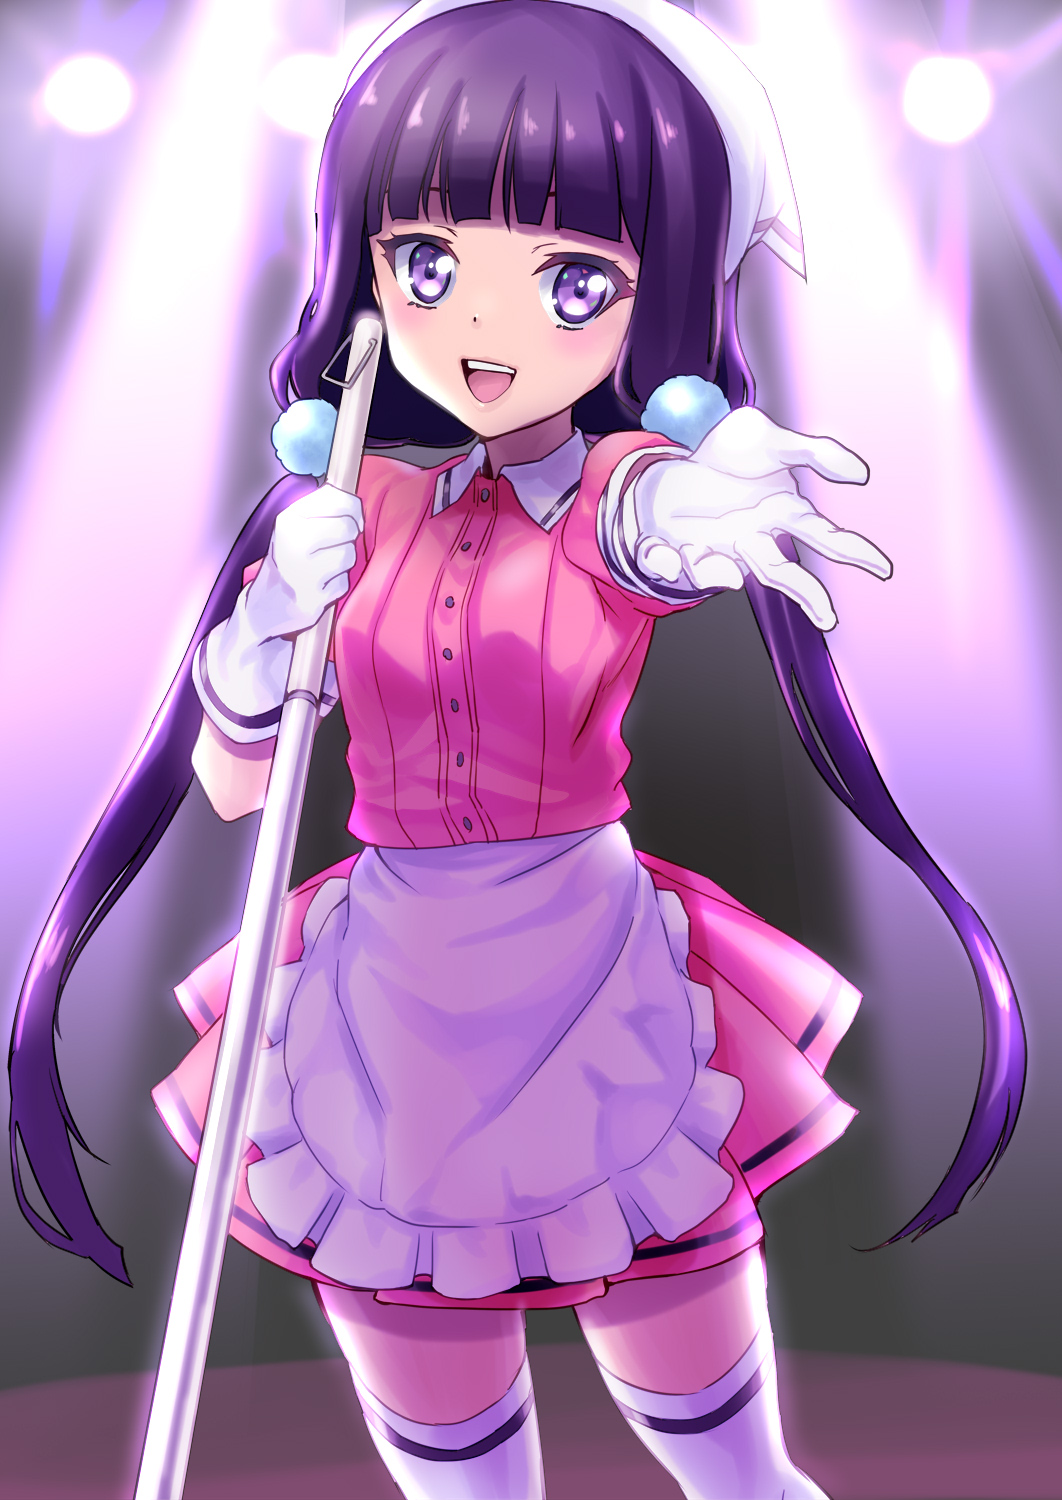 1000 1girl :d apron bangs blend_s blunt_bangs broom collared_shirt cowboy_shot dress_shirt floating_hair gloves highres holding holding_broom long_hair looking_at_viewer miniskirt open_mouth pink_shirt pink_skirt pleated_skirt purple_hair sakuranomiya_maika shiny shiny_hair shirt short_sleeves skirt smile solo standing thigh-highs twintails very_long_hair violet_eyes waist_apron white_apron white_gloves white_legwear wing_collar zettai_ryouiki